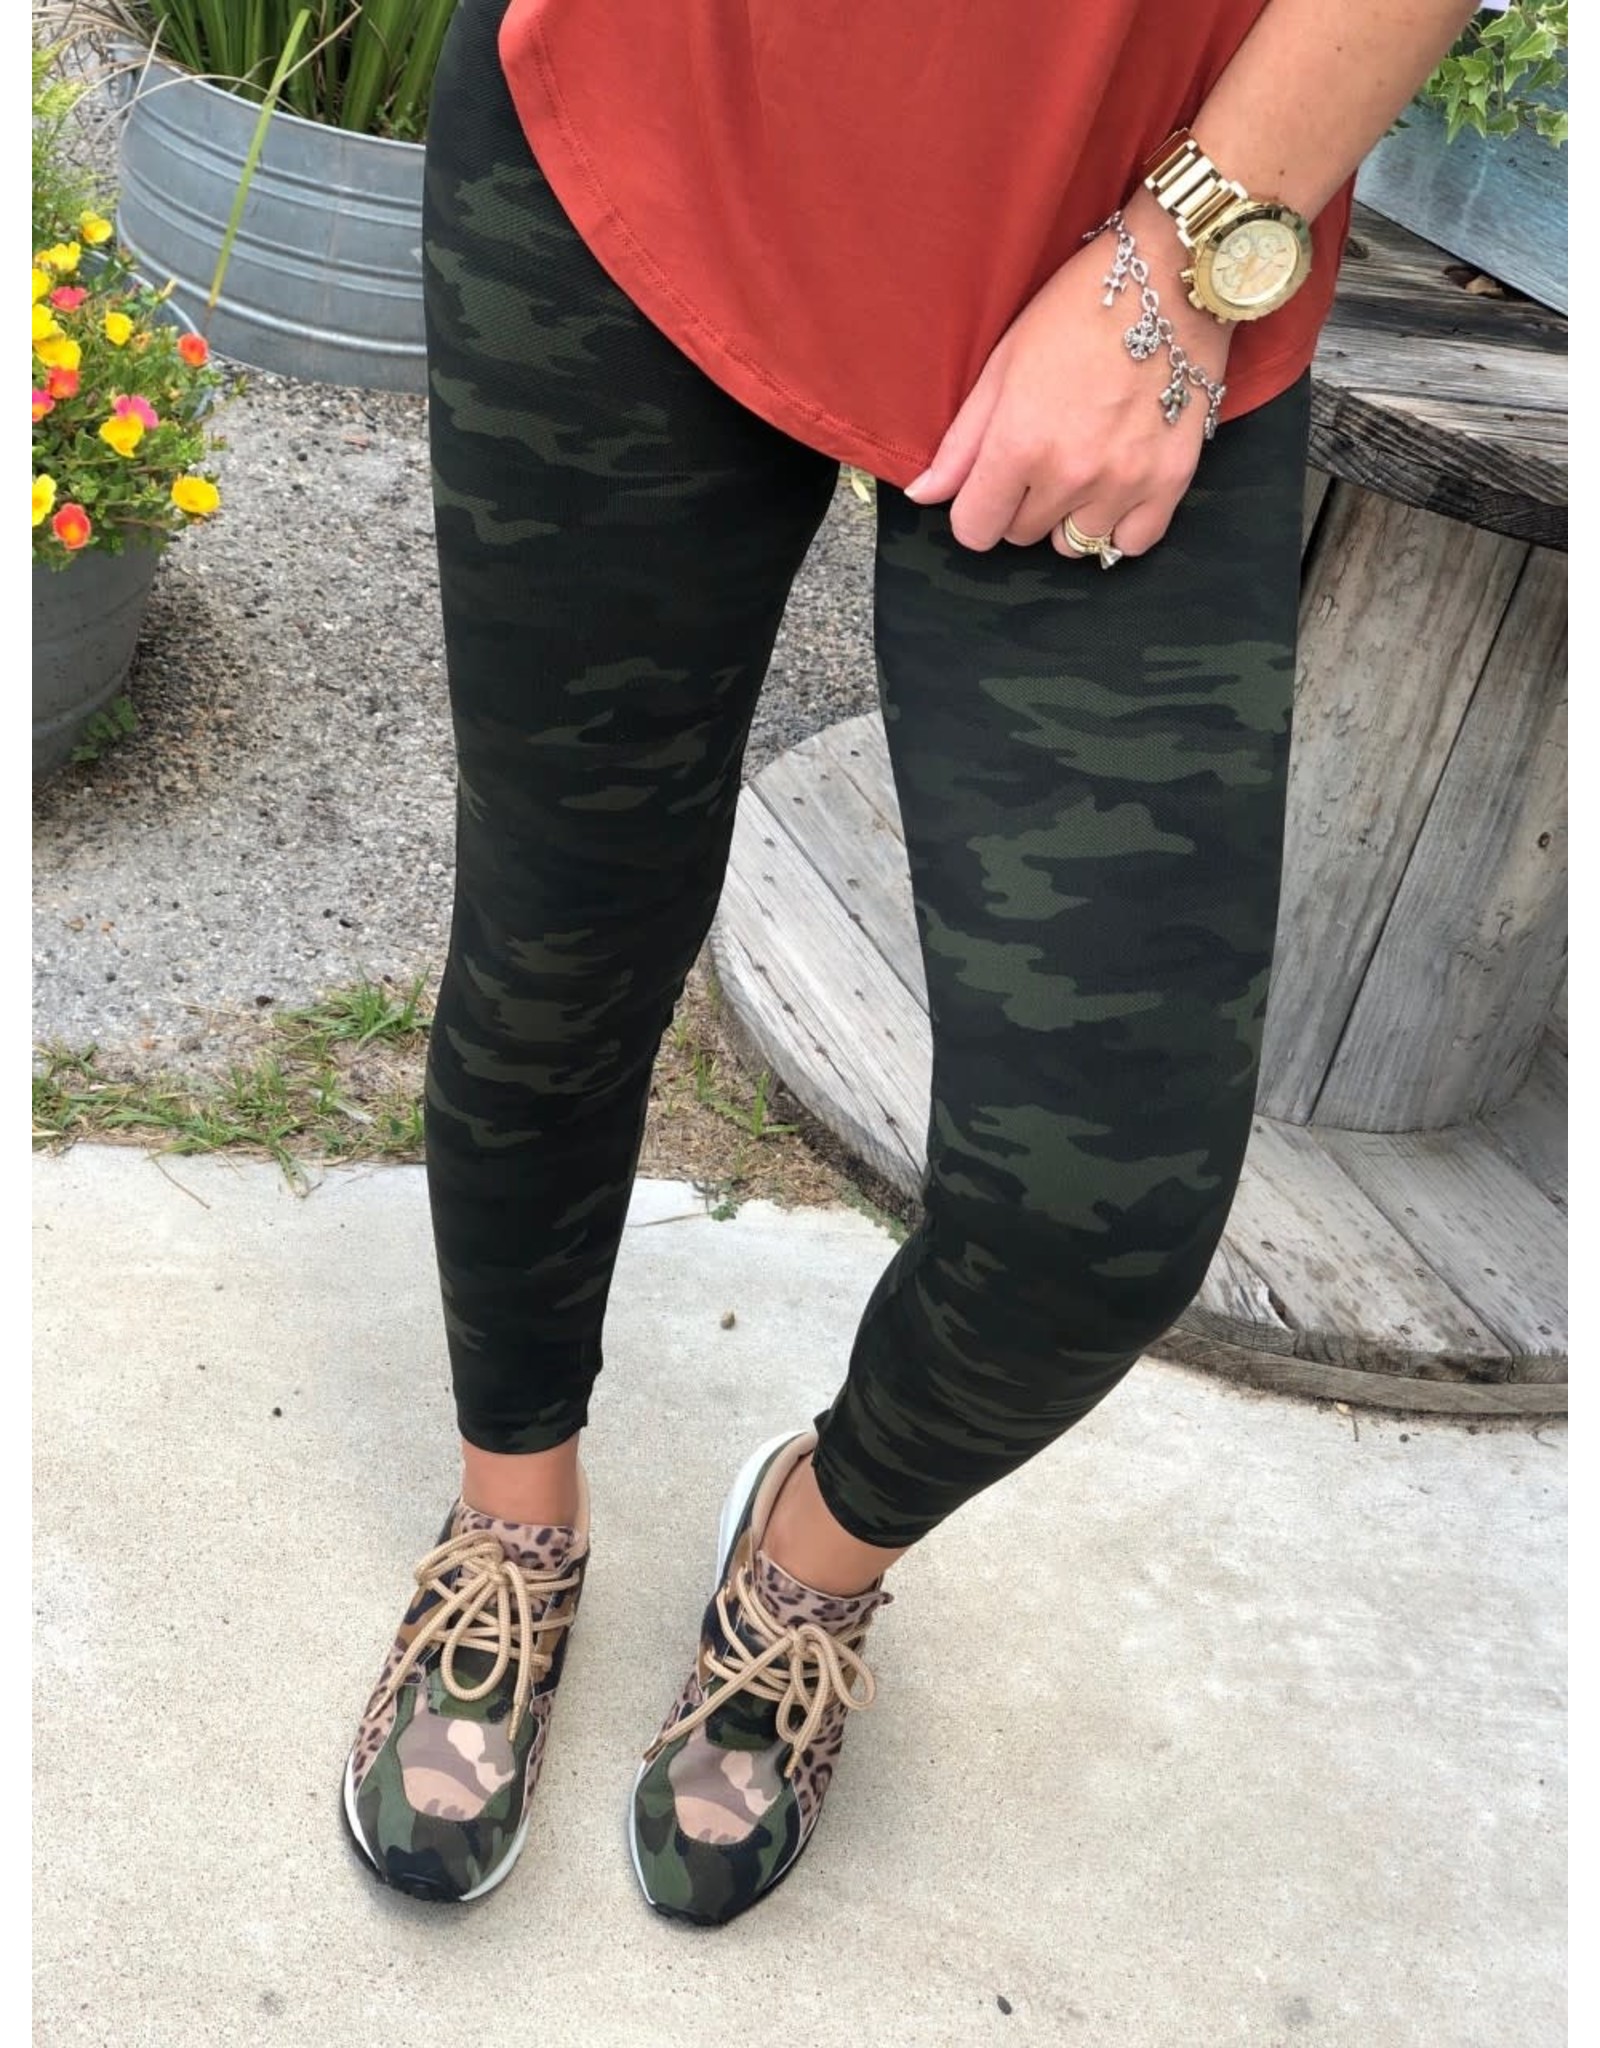 Spanx Look At Me Now Seamless High Rise Leggings: Black/Grey/Green Camo  Size M - $49 - From Michelle